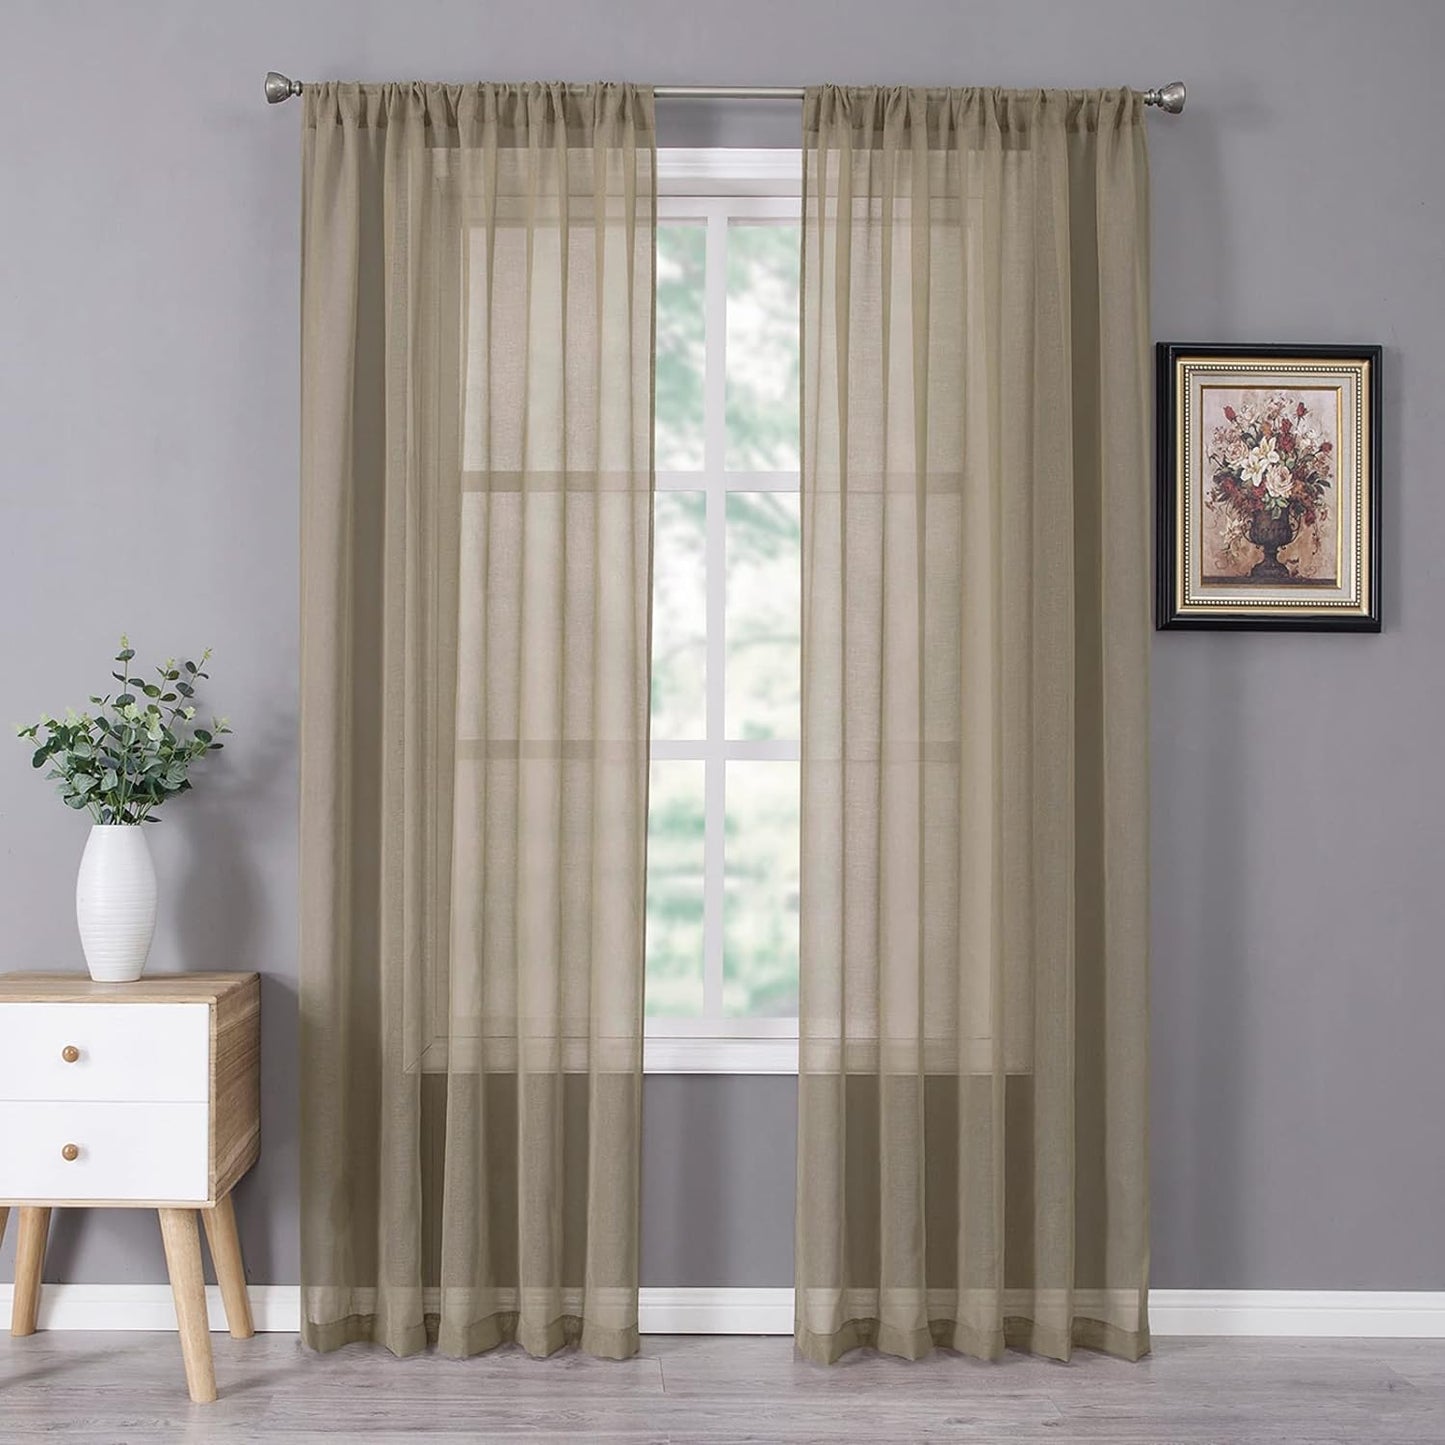 Tollpiz Short Sheer Curtains Linen Textured Bedroom Curtain Sheers Light Filtering Rod Pocket Voile Curtains for Living Room, 54 X 45 Inches Long, White, Set of 2 Panels  Tollpiz Tex Taos Taupe 54"W X 84"L 